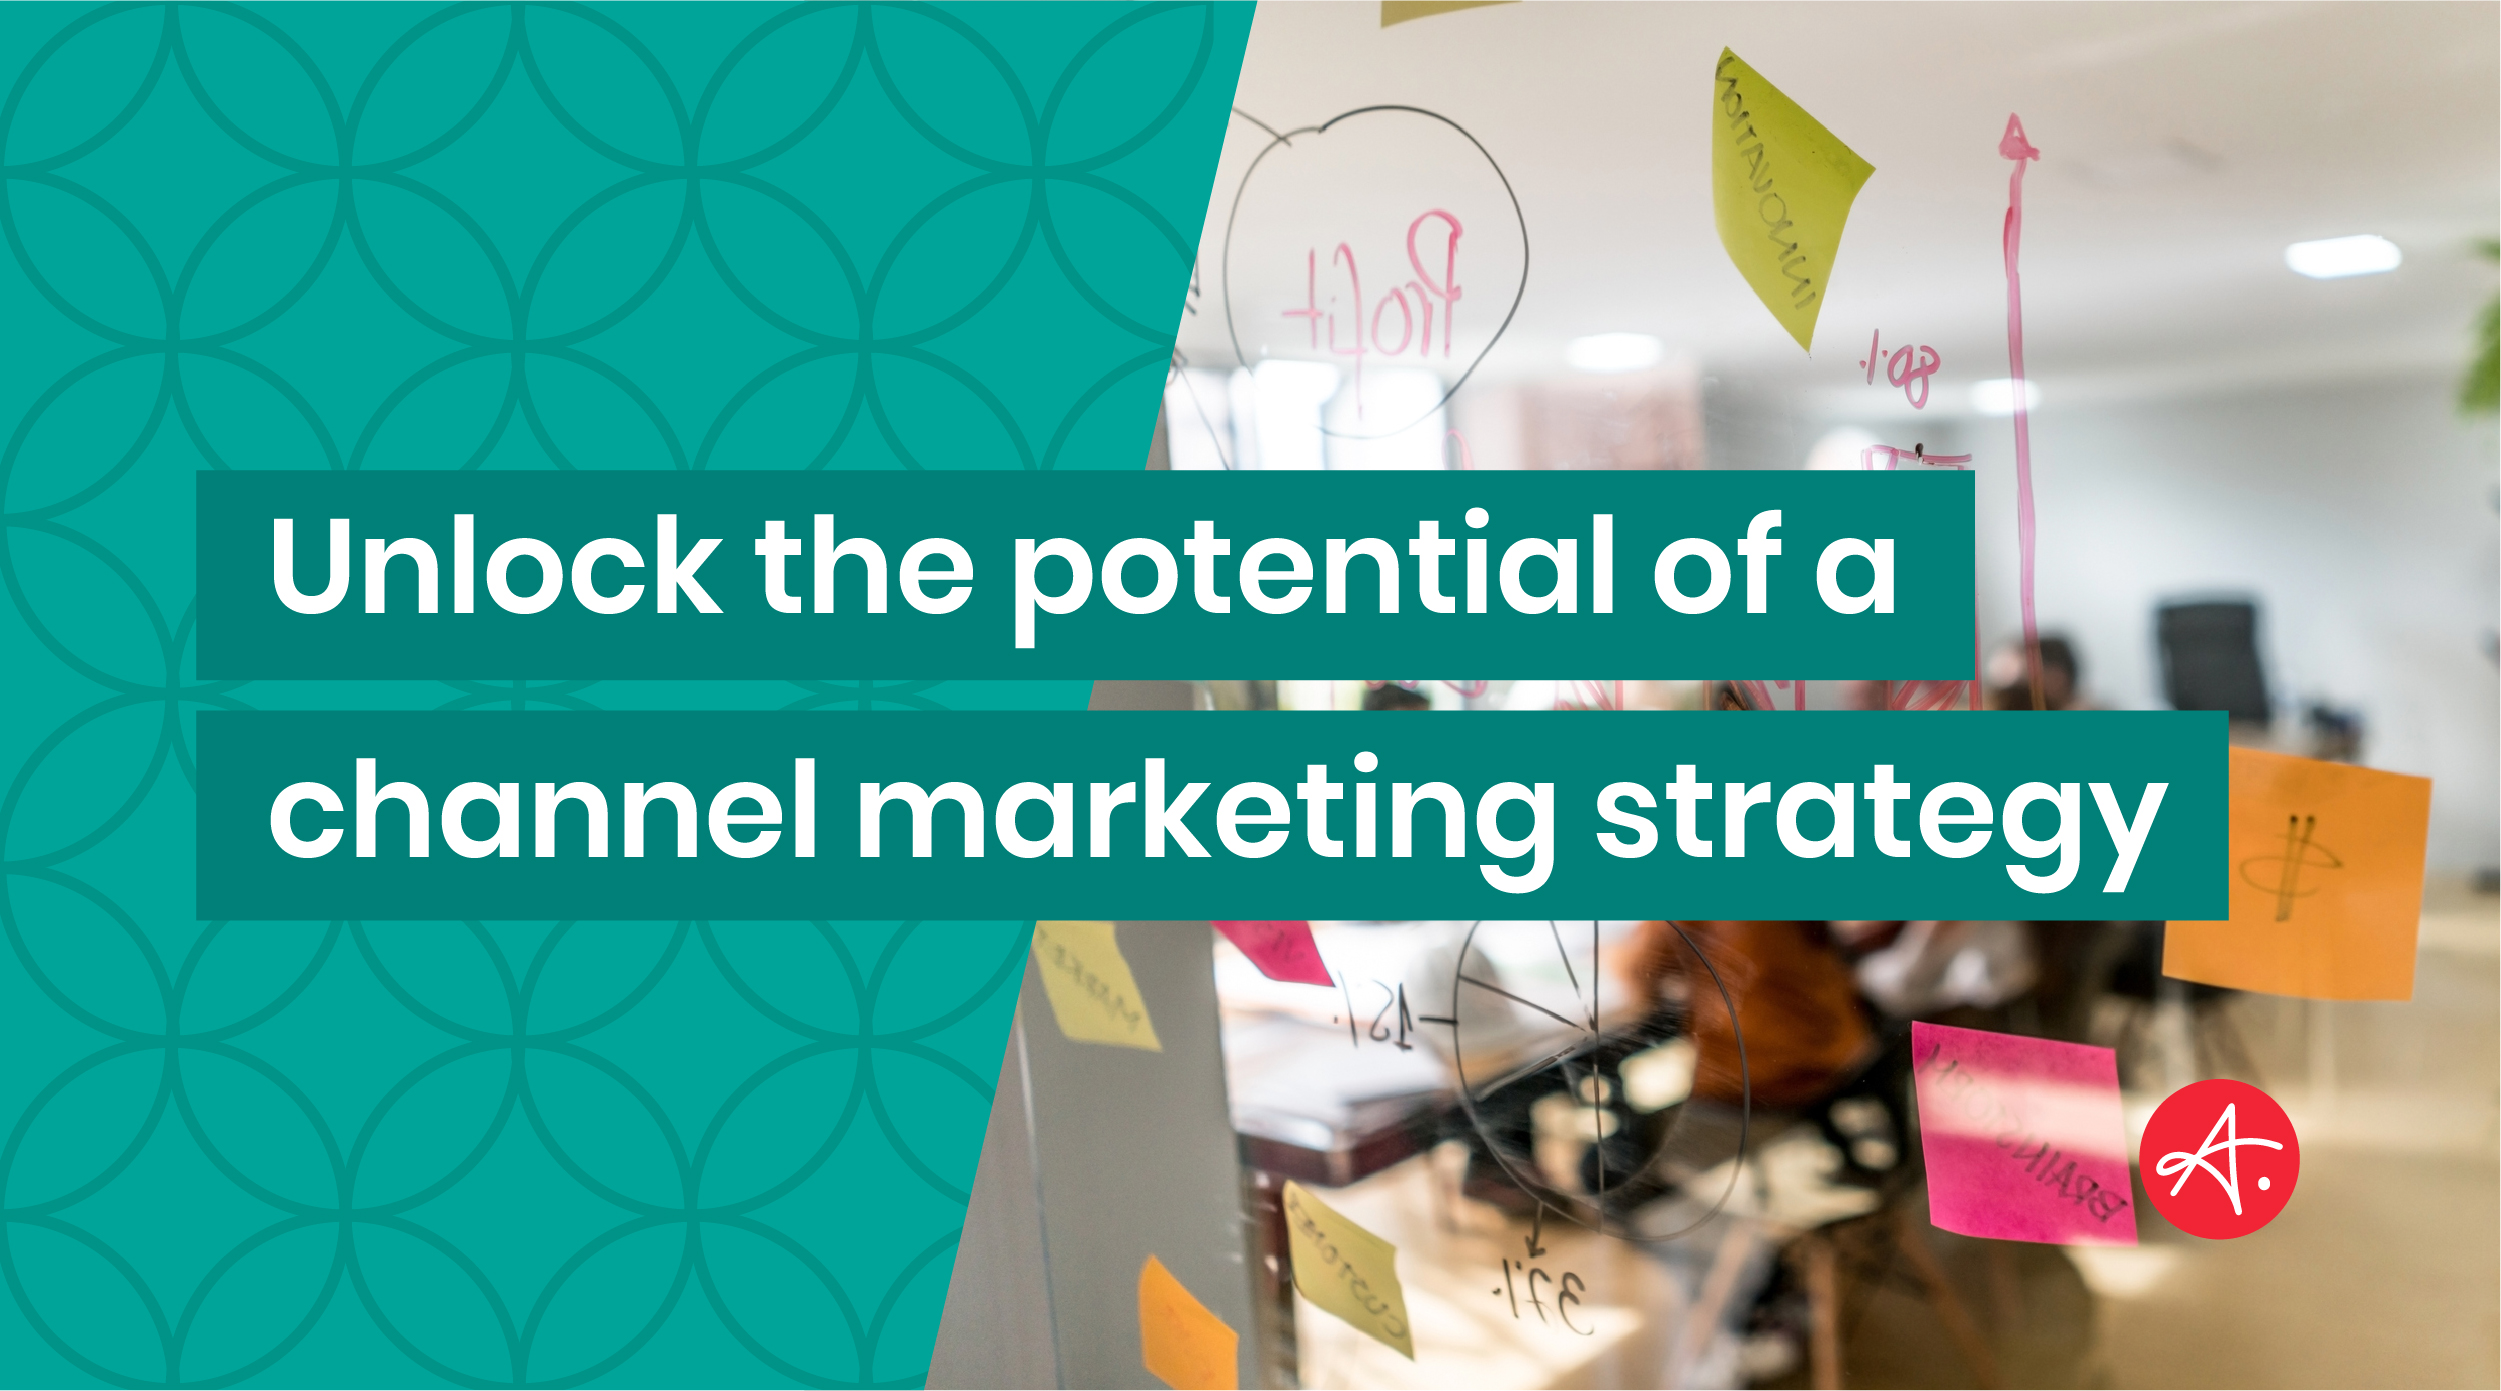 Unlock the potential of a channel marketing strategy